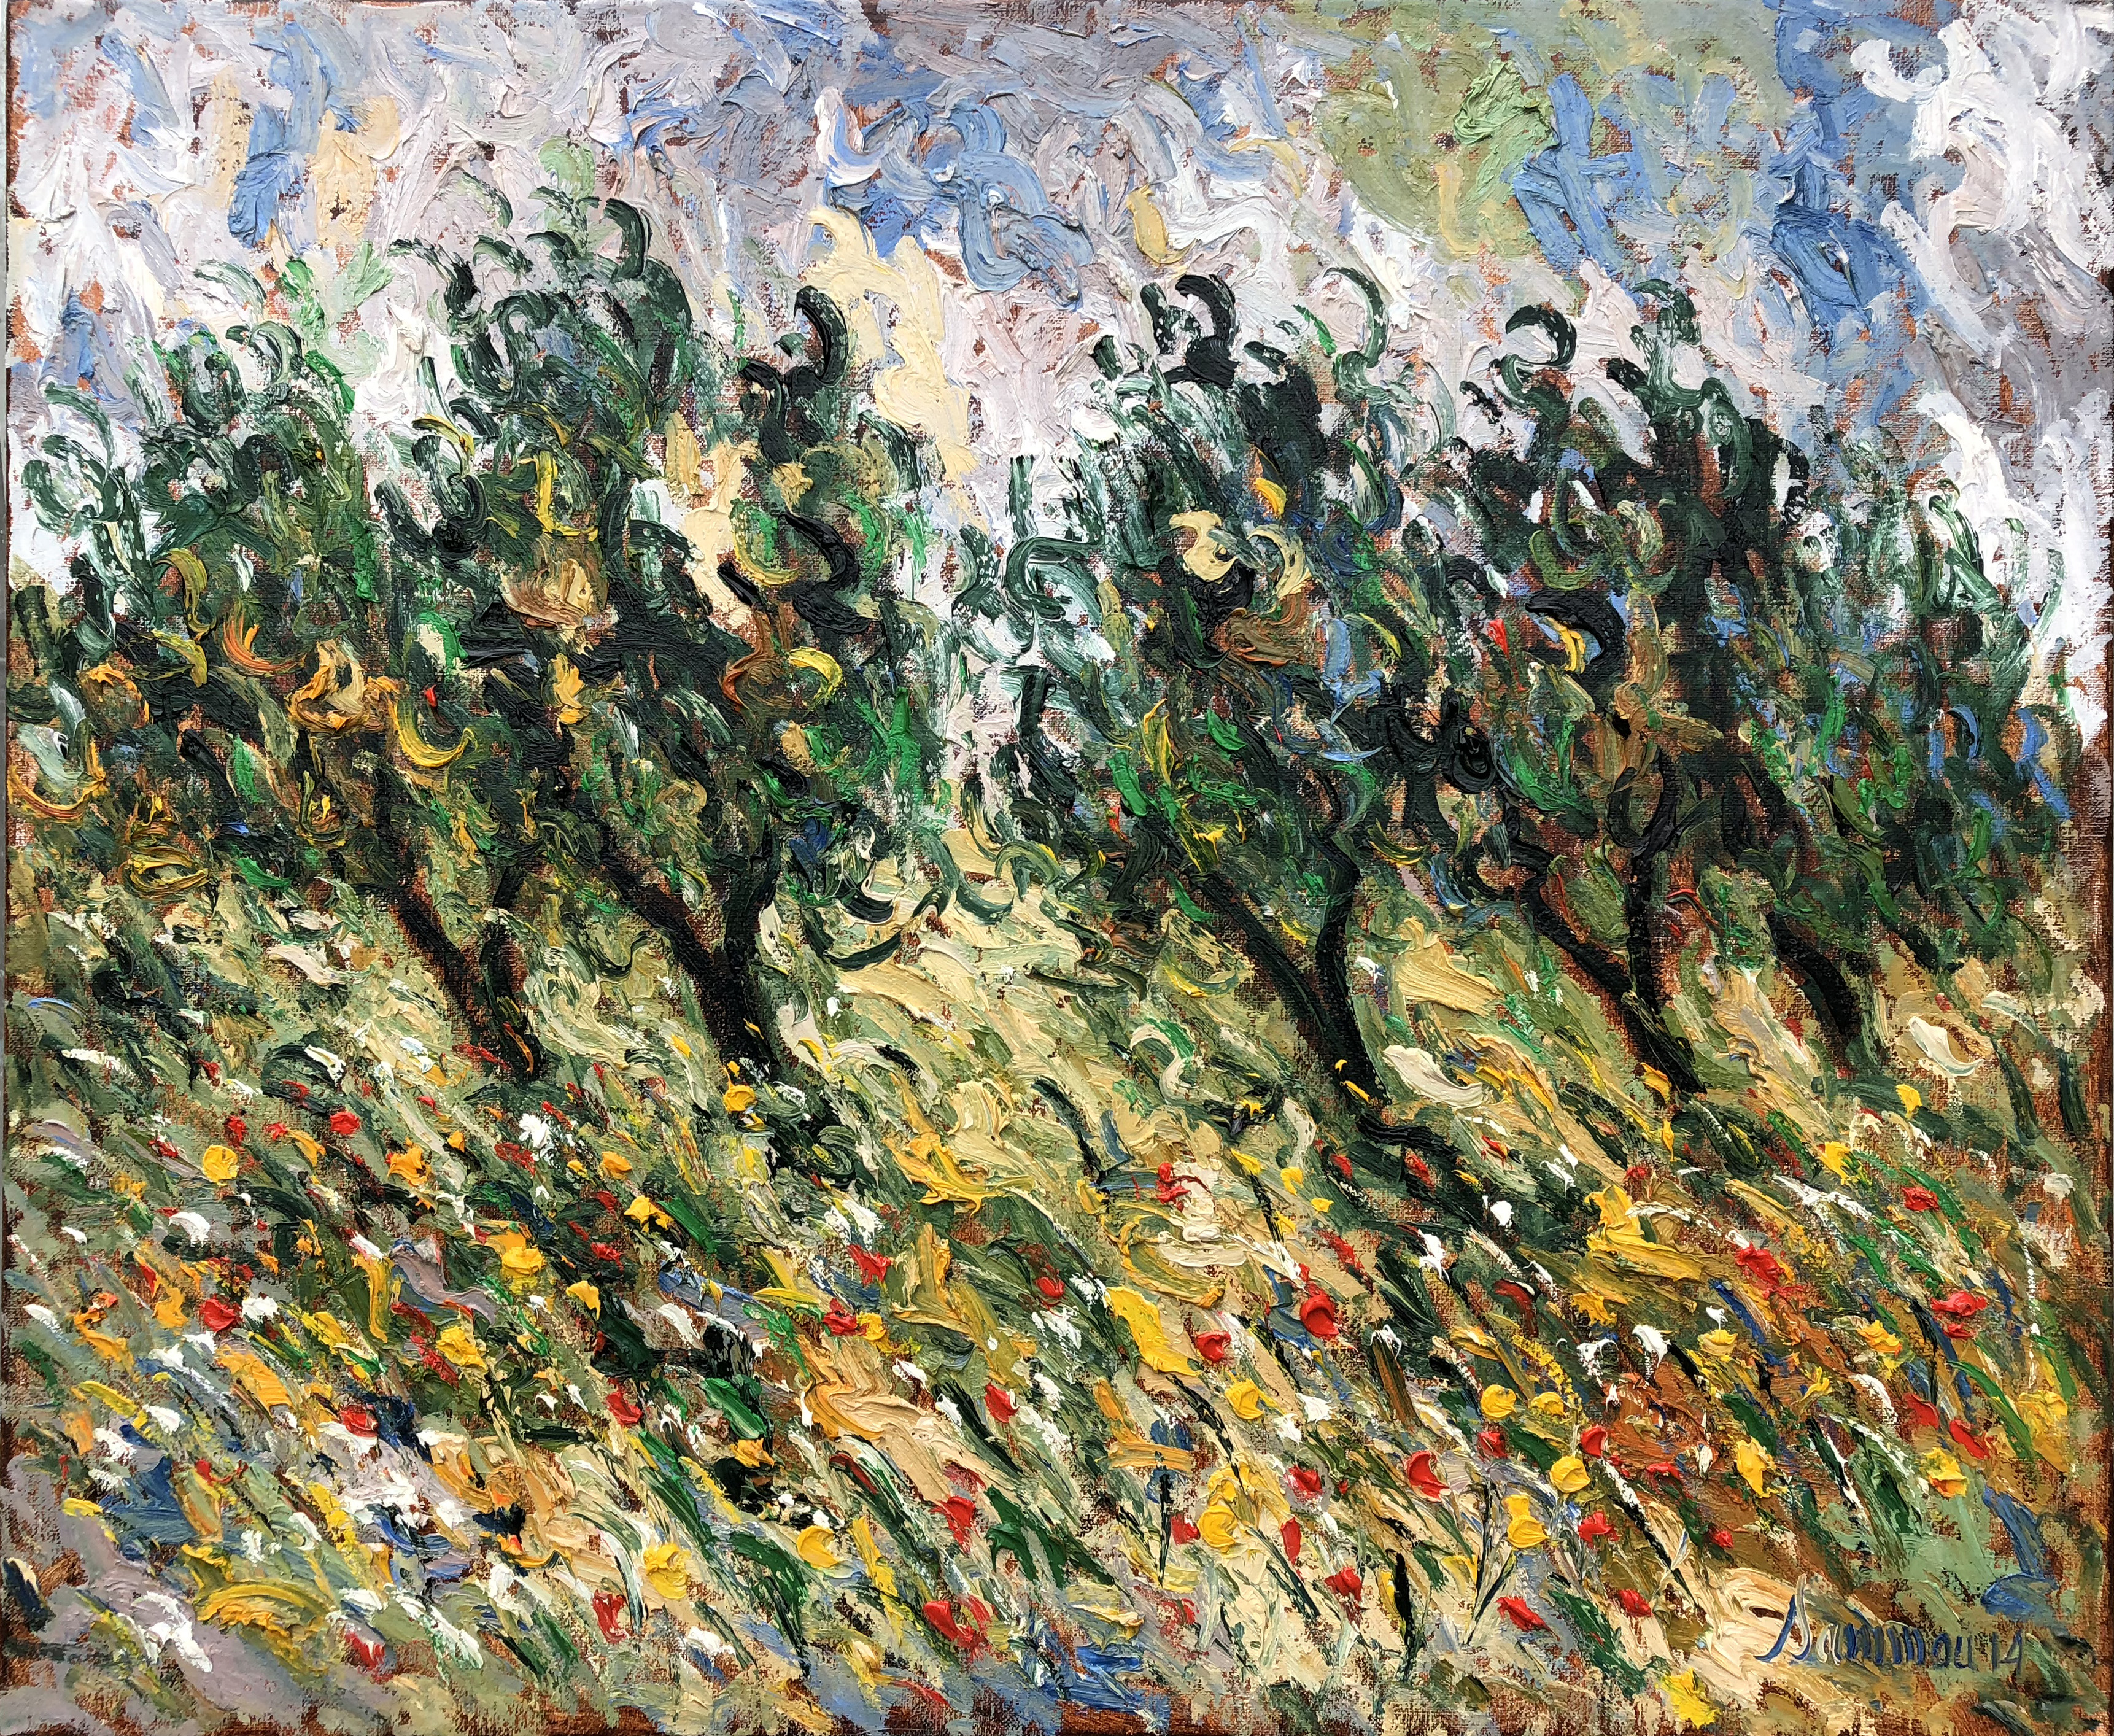 SAMIR SAMMOUN - Young Olive Trees & Poppies - Oil on Canvas - 30 x 36 inches